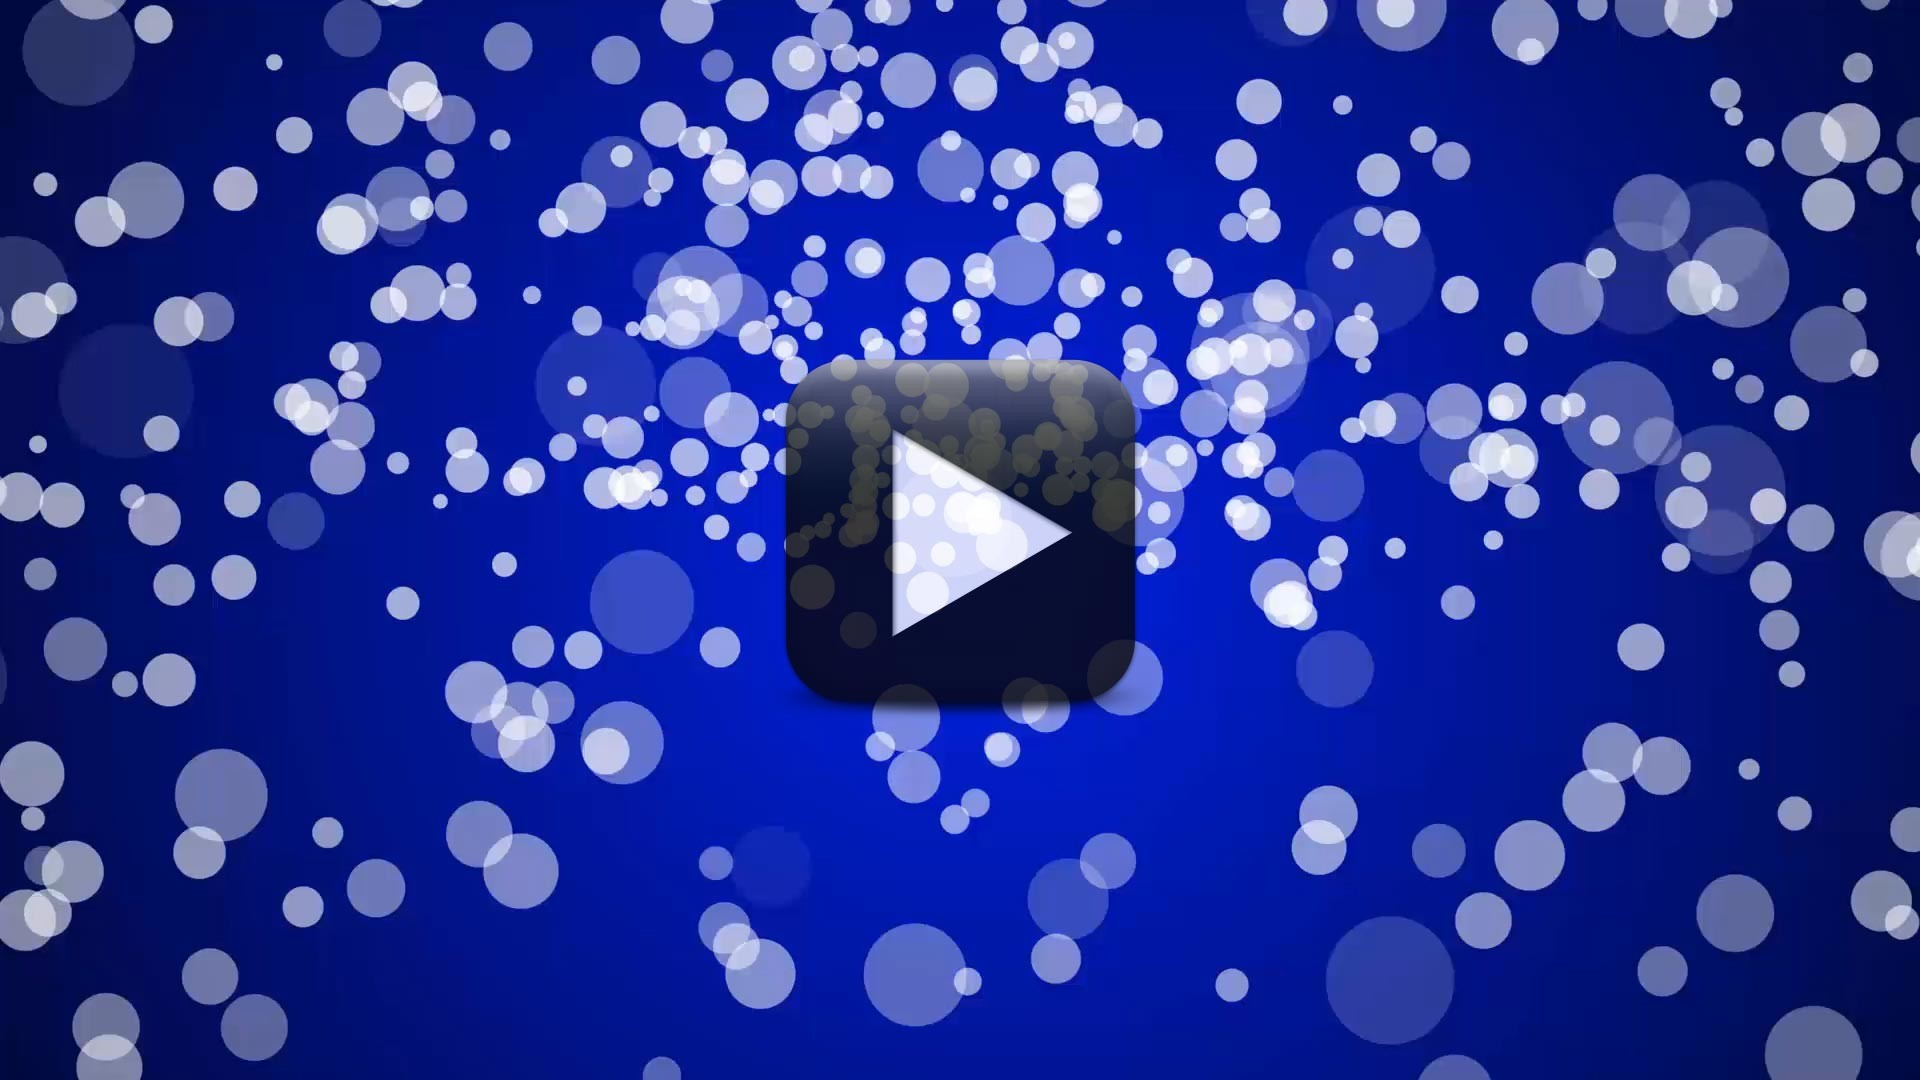 1920x1080 ... Animated Background Videos Free Downloads | All Design Creative ...